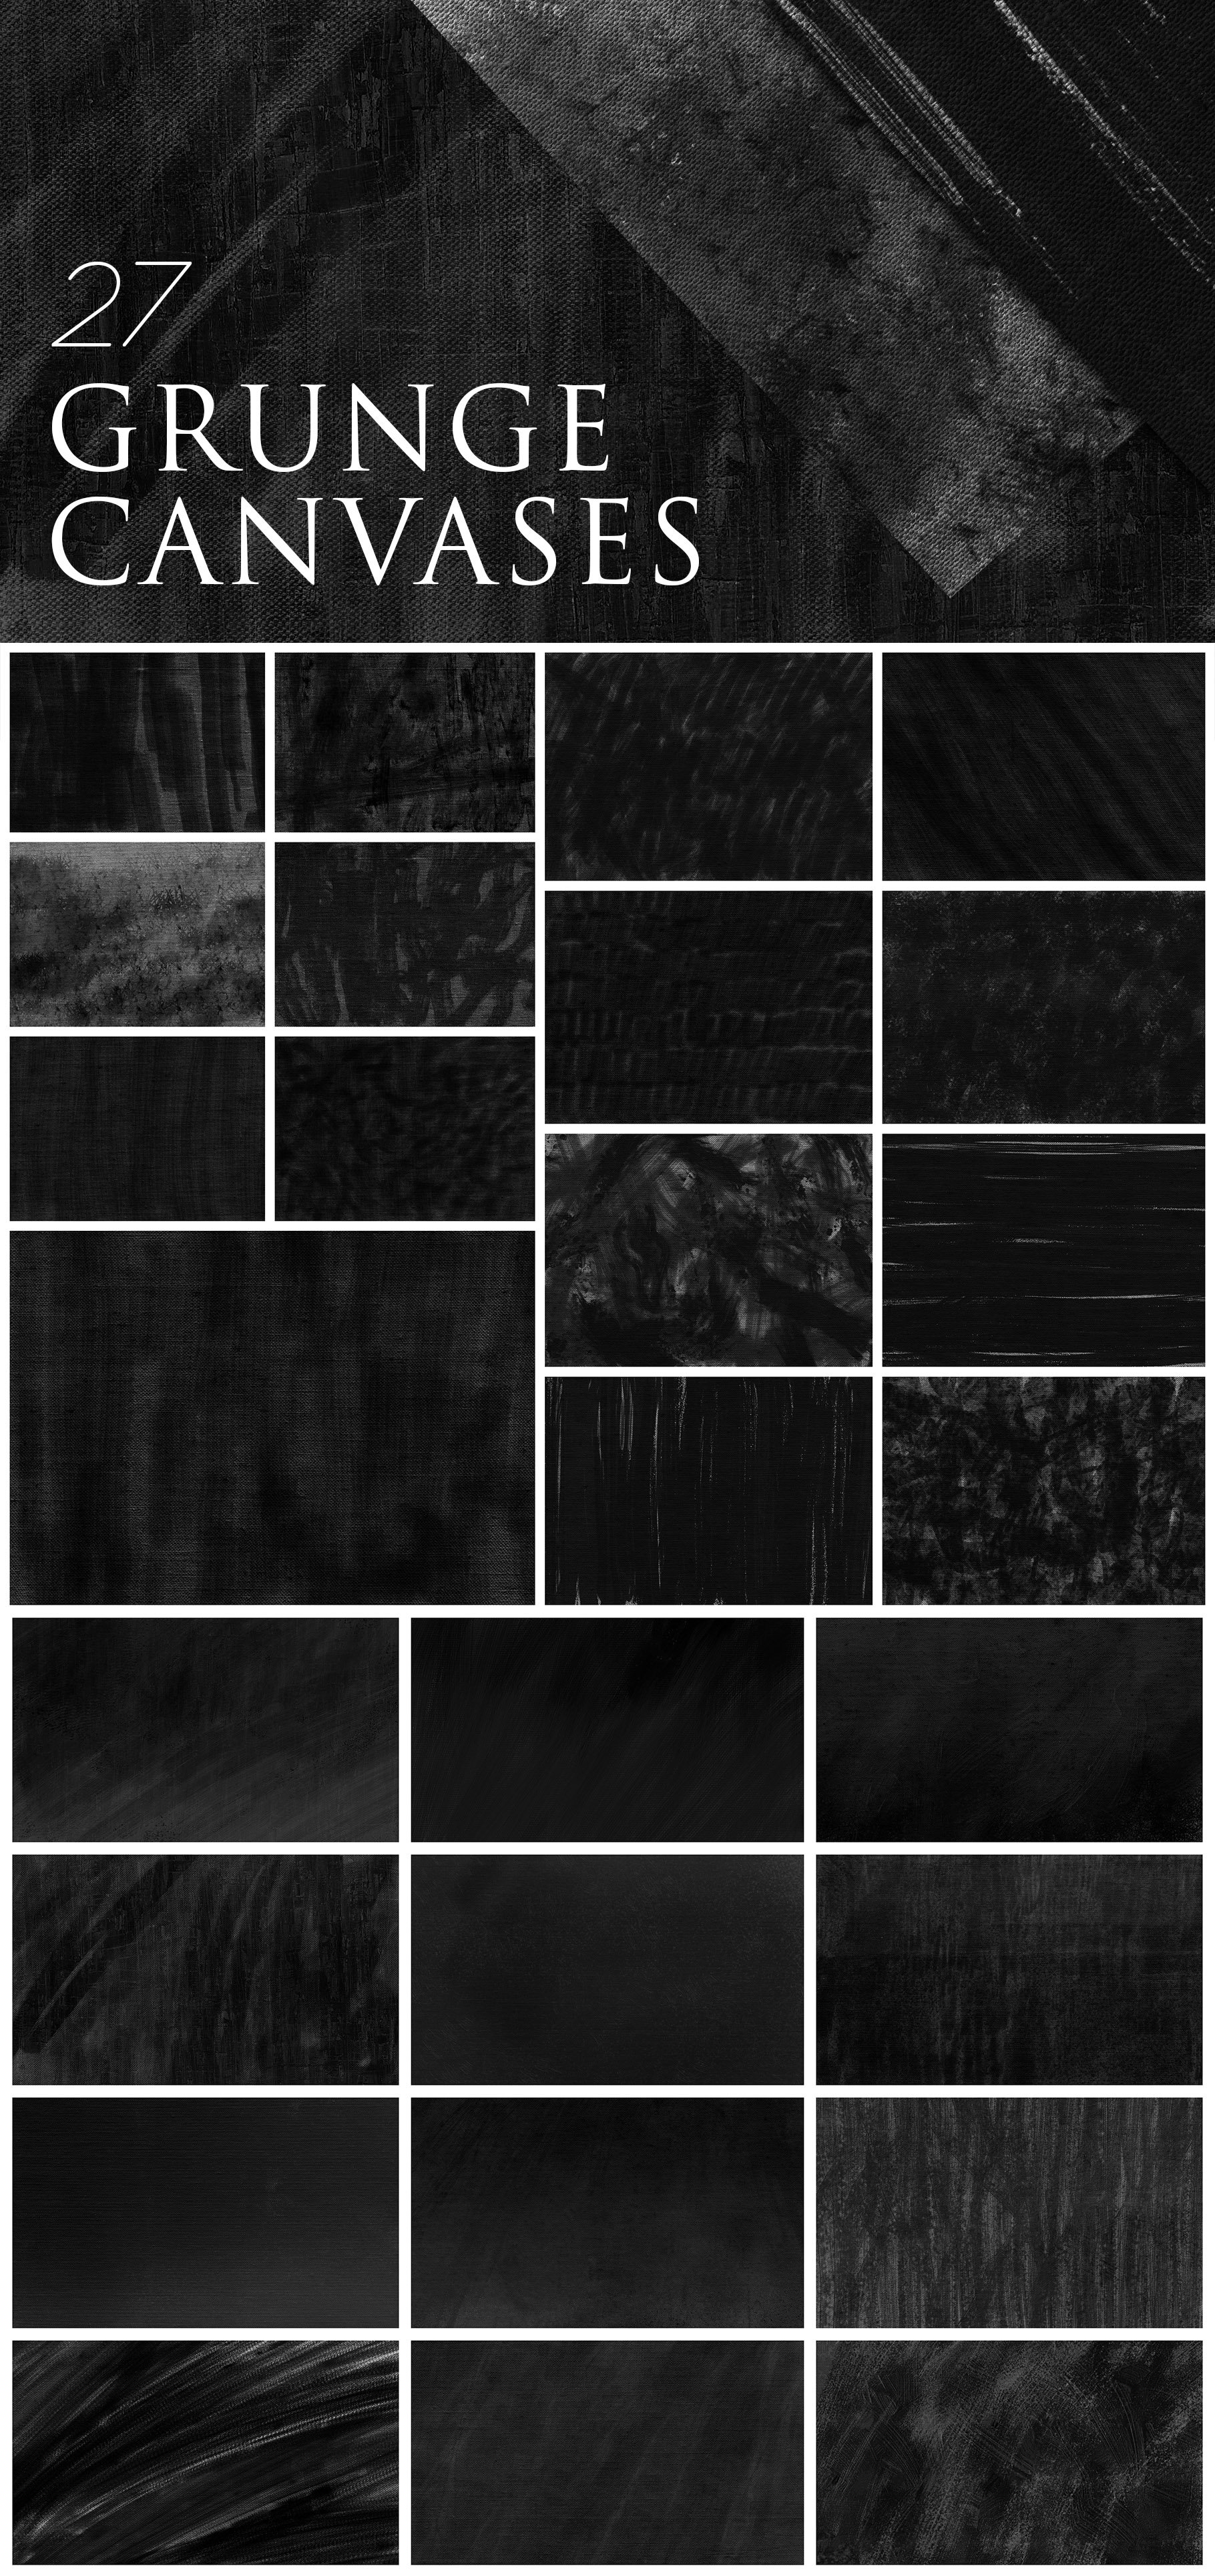 preview 5 grunge dark canvases 752